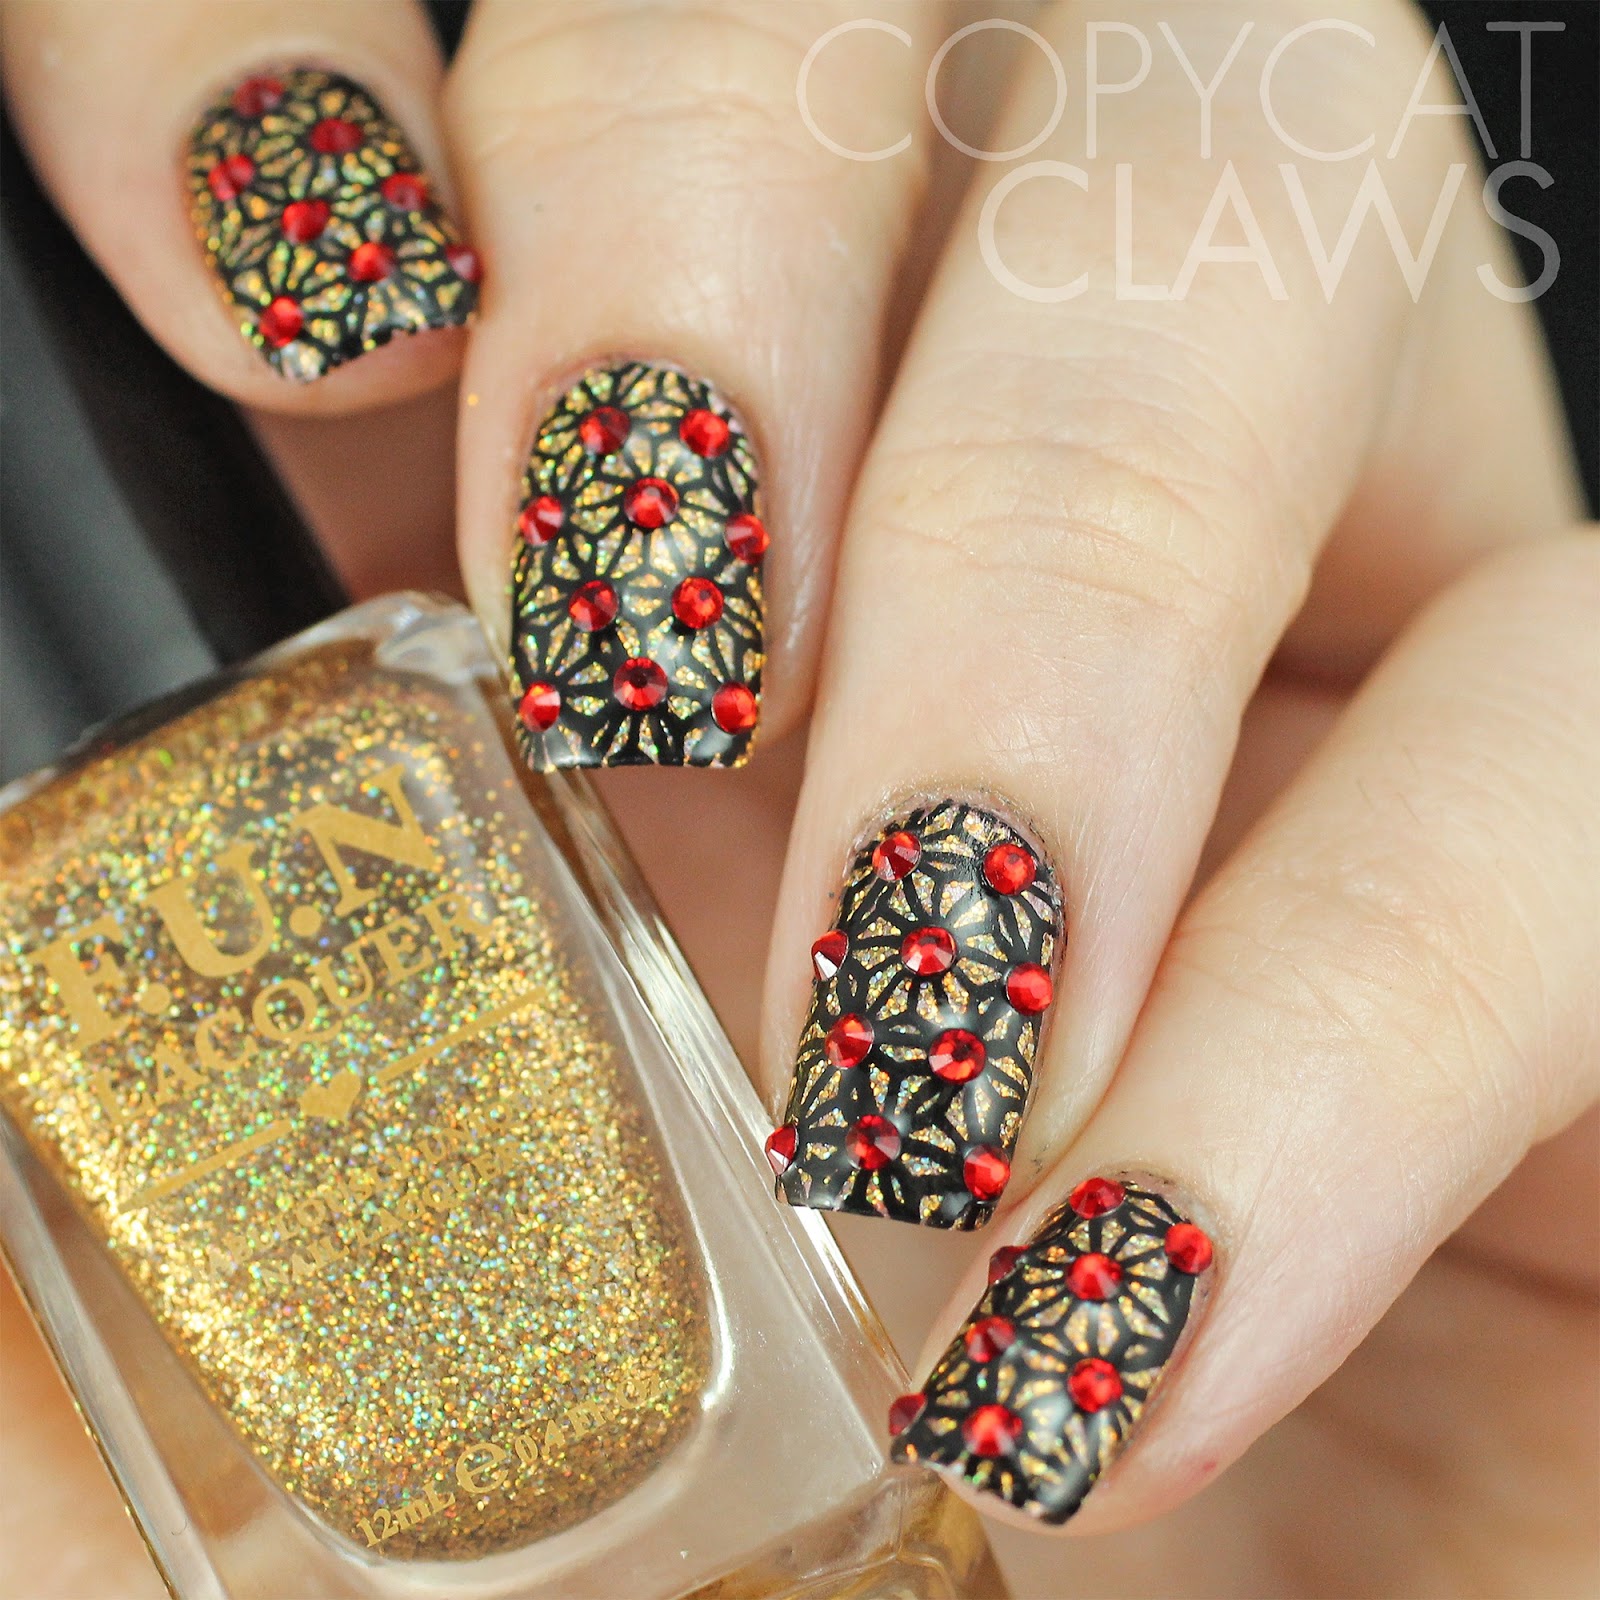 Copycat Claws: Sunday Stamping - Bling It Up